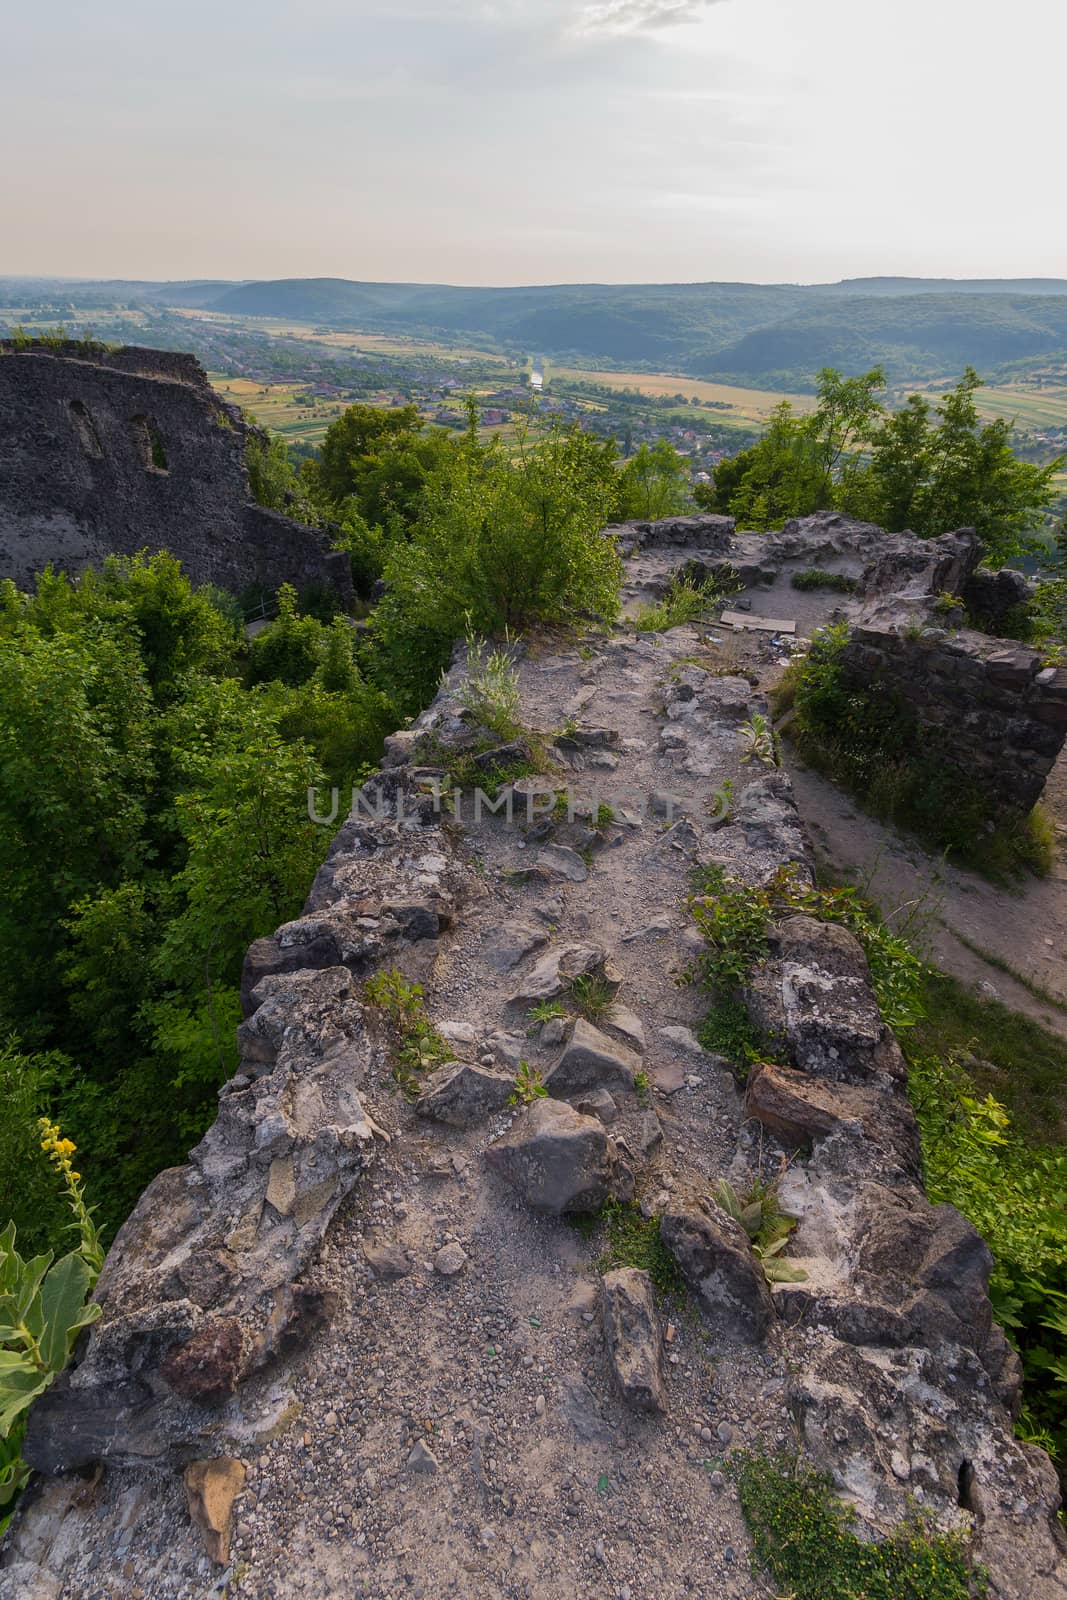 A stone wall enclosing an ancient fortress from enemies in the past by Adamchuk